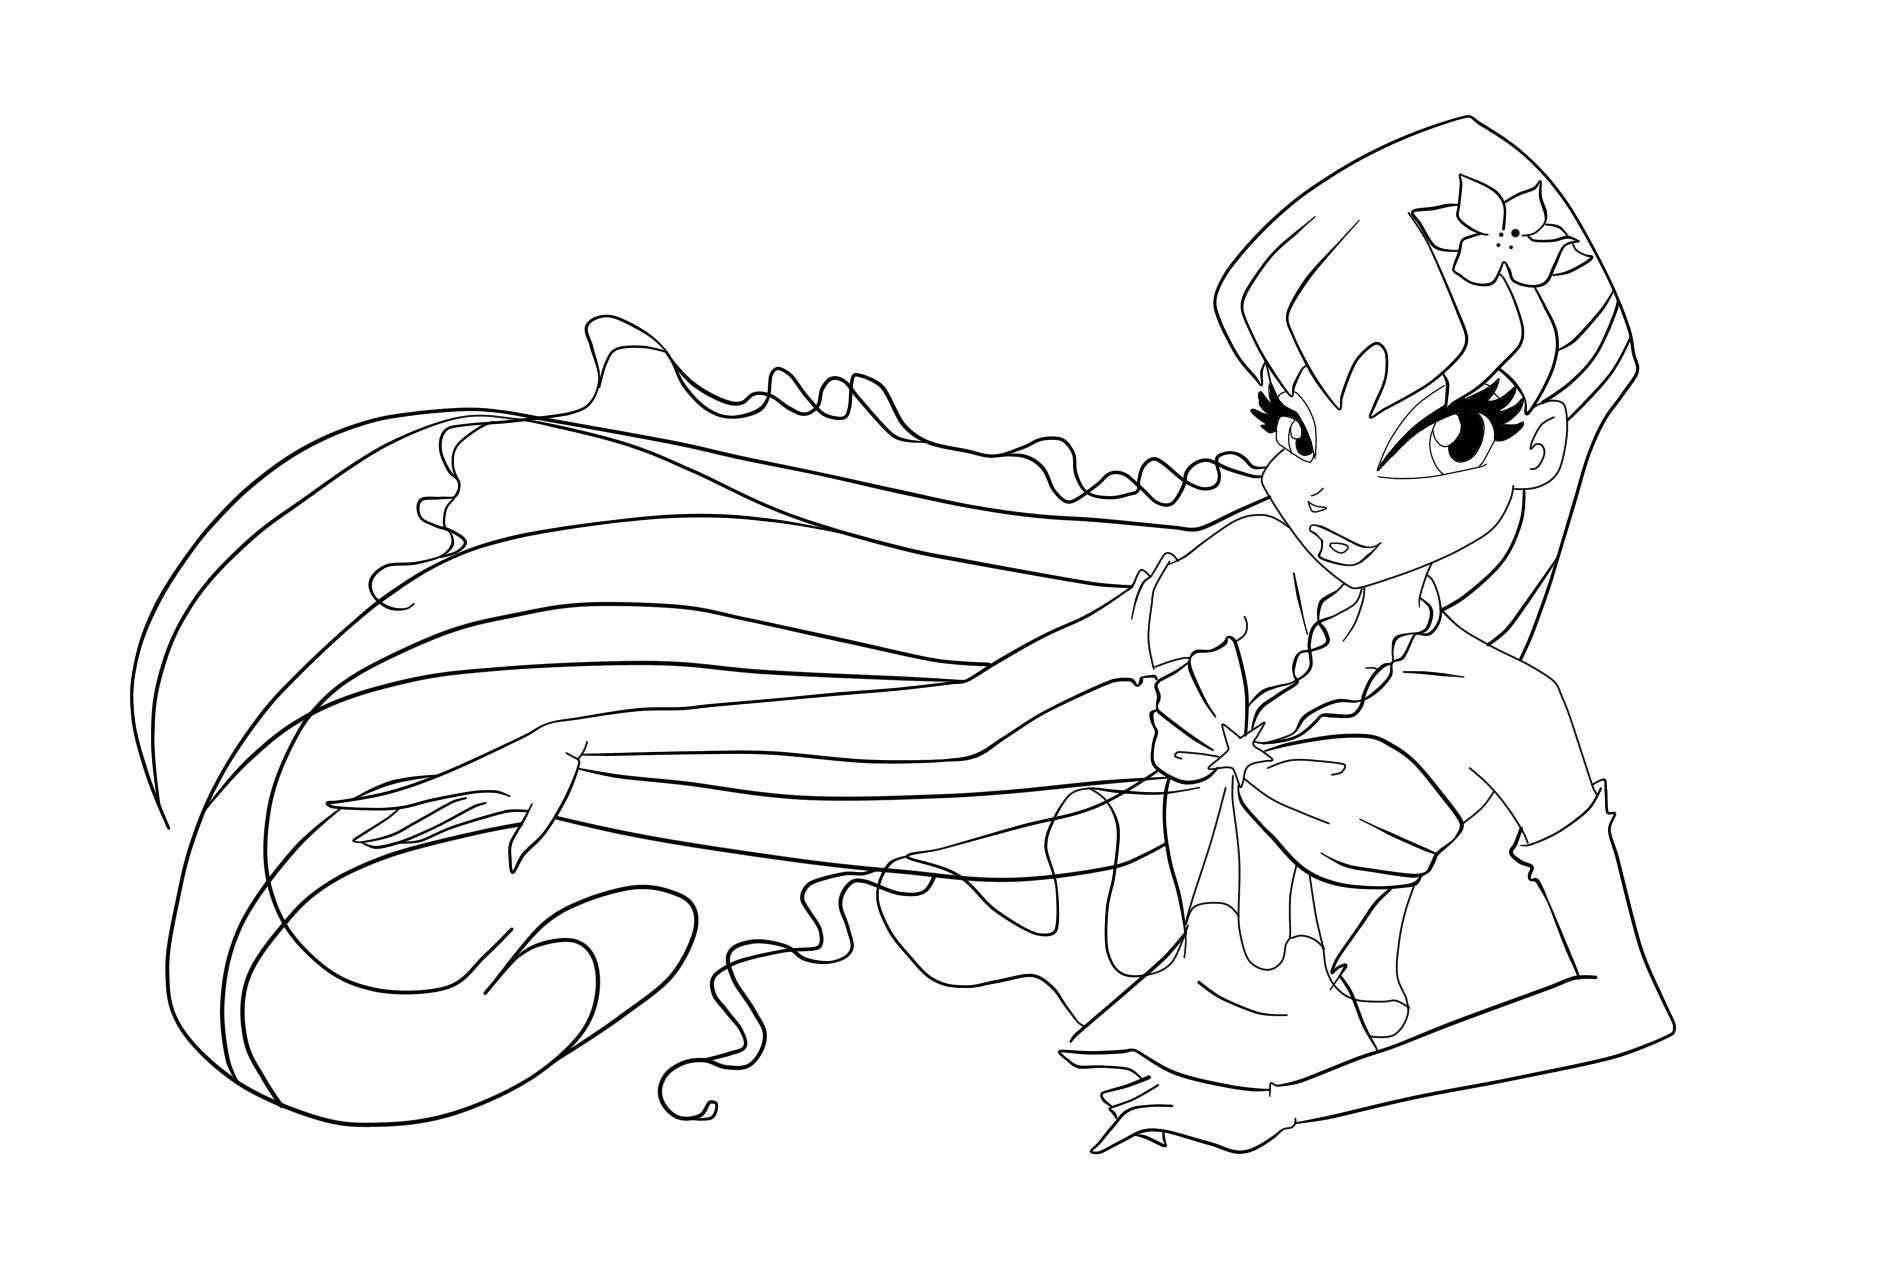 Coloring Stella from winx cartoon. Category fairy. Tags:  Character cartoon, Winx.